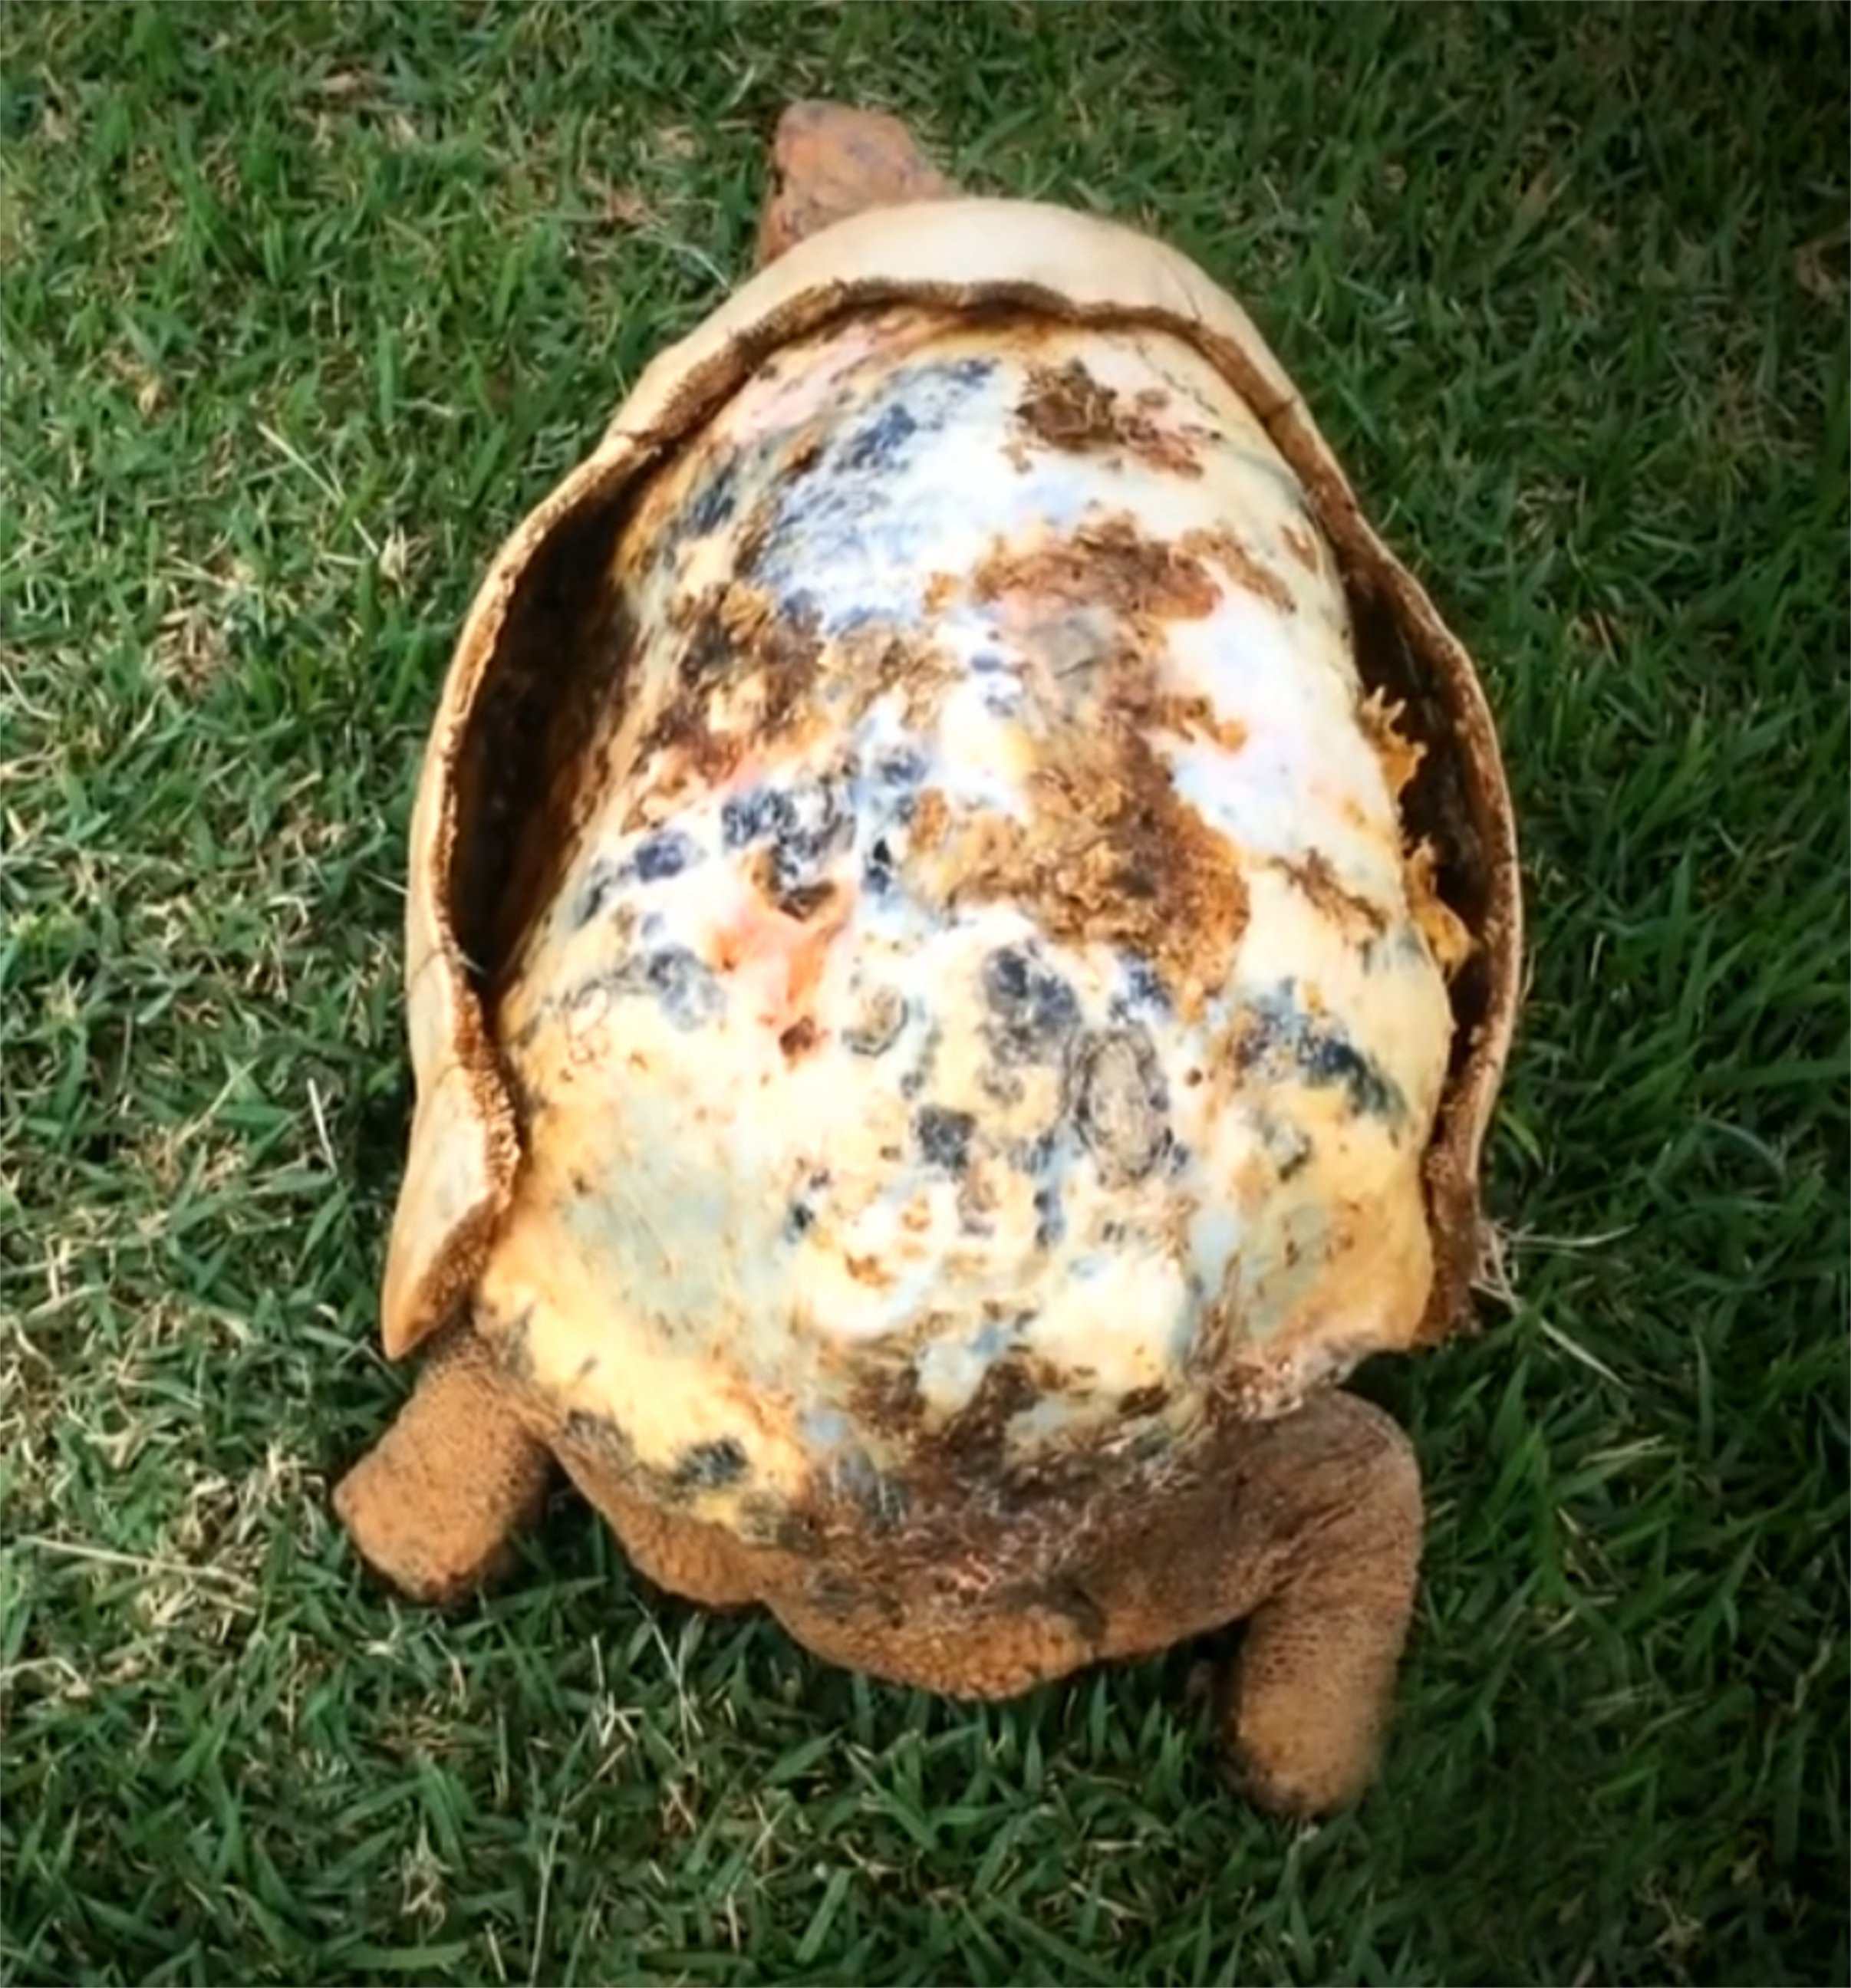 PHOTO: Freddy, a tortoise whose shell was burned in a fire, got a second chance when a Brazilian group called the Animal Avengers made her a new 3D printed custom shell. 